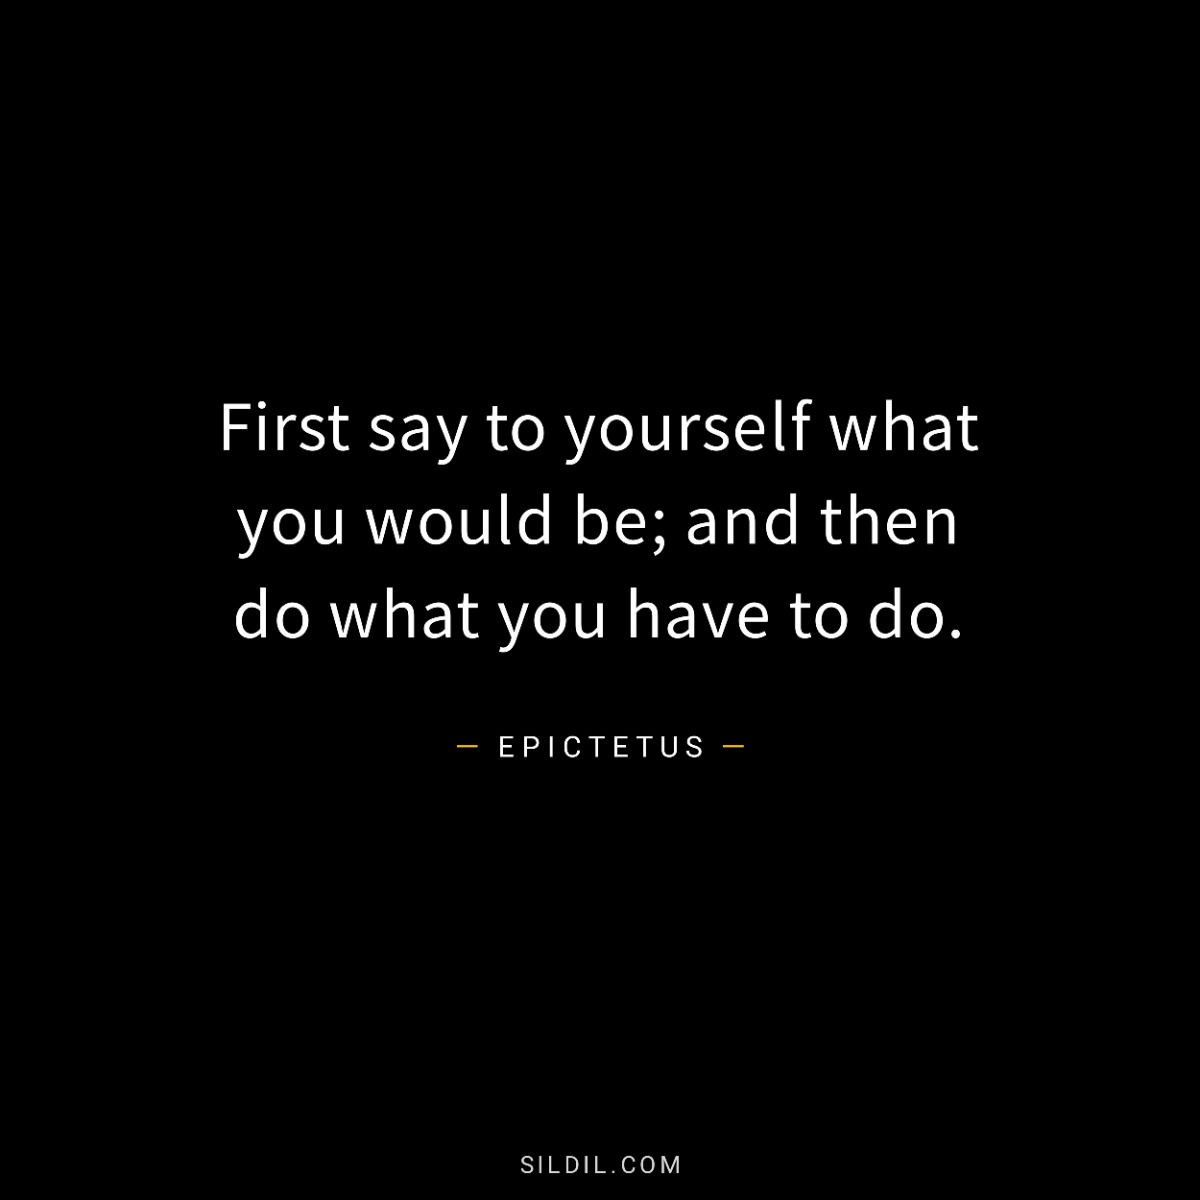 First say to yourself what you would be; and then do what you have to do.